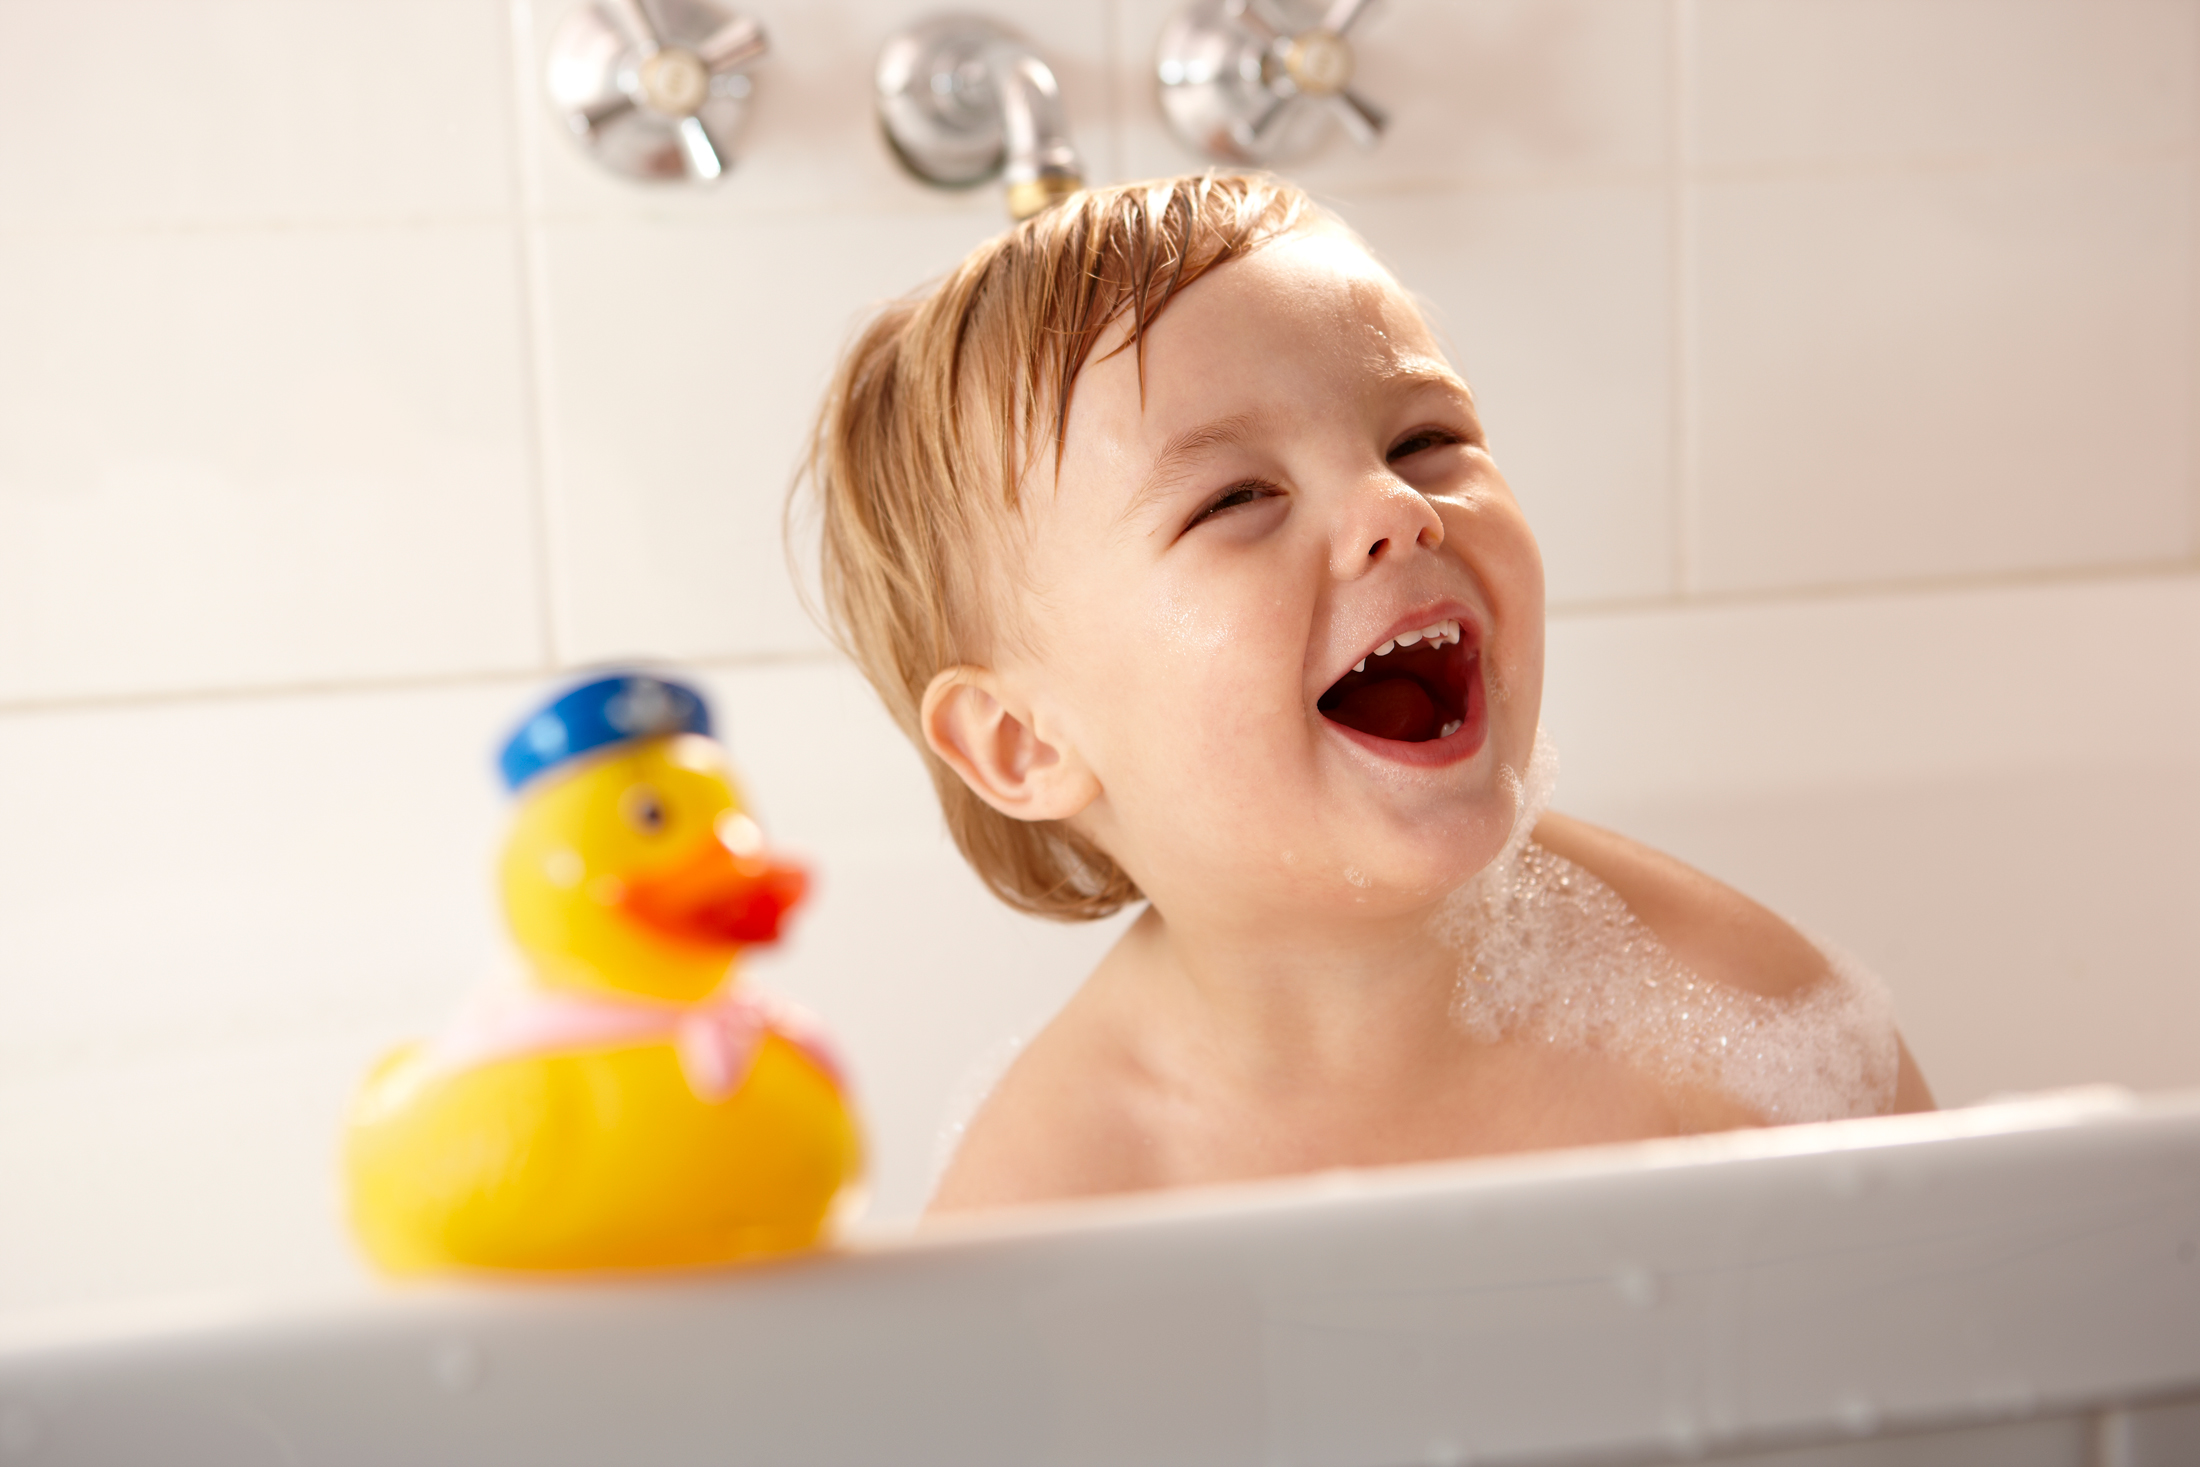 Toddler in the bath with rubber duck